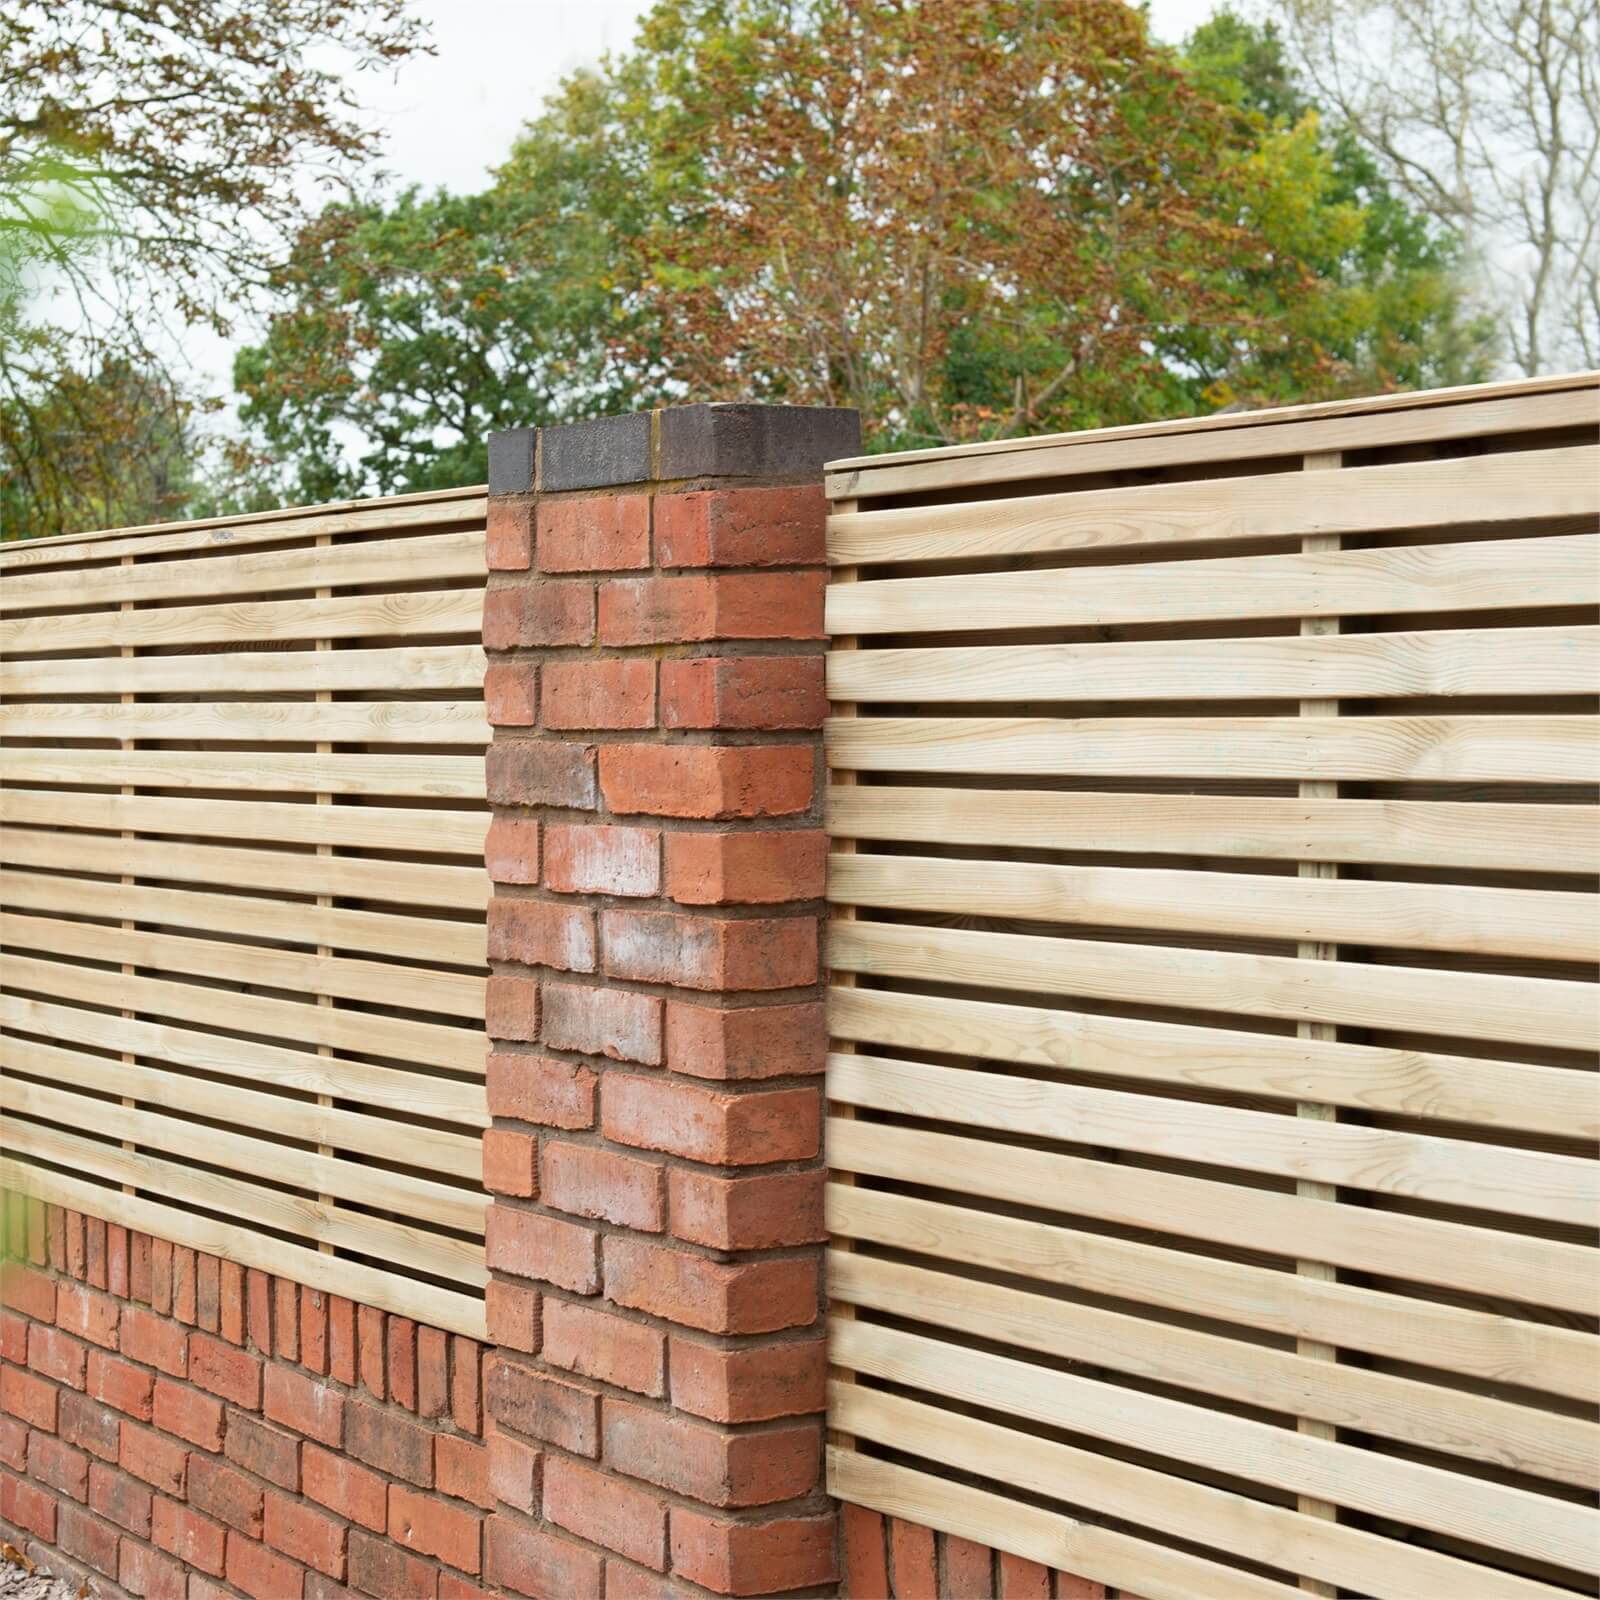 Forest Double Forest Slatted Fence Panel - 3ft - Pack of 3